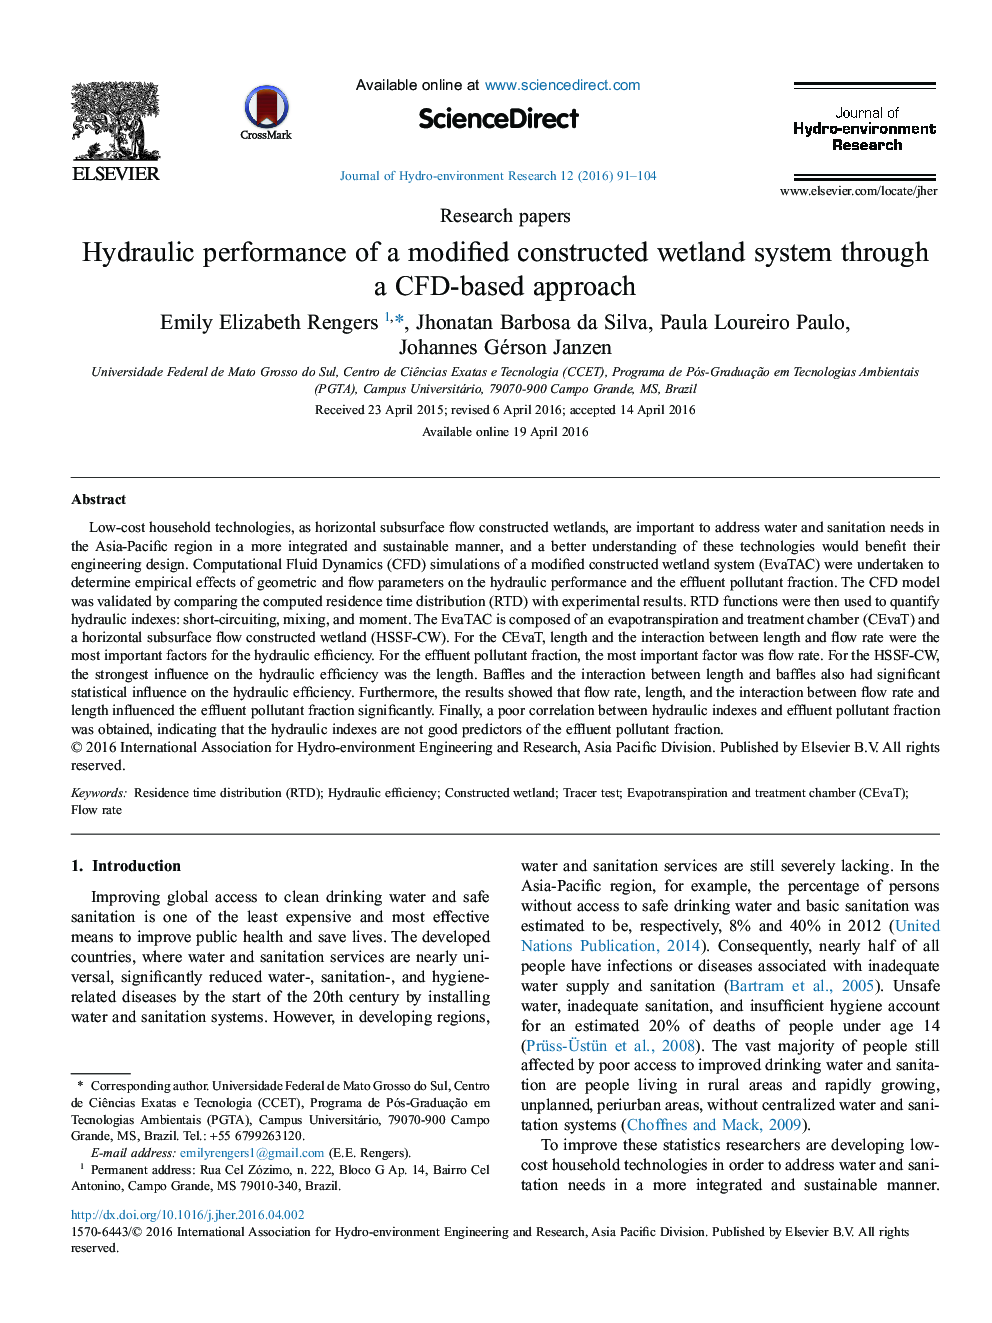 Hydraulic performance of a modified constructed wetland system through a CFD-based approach